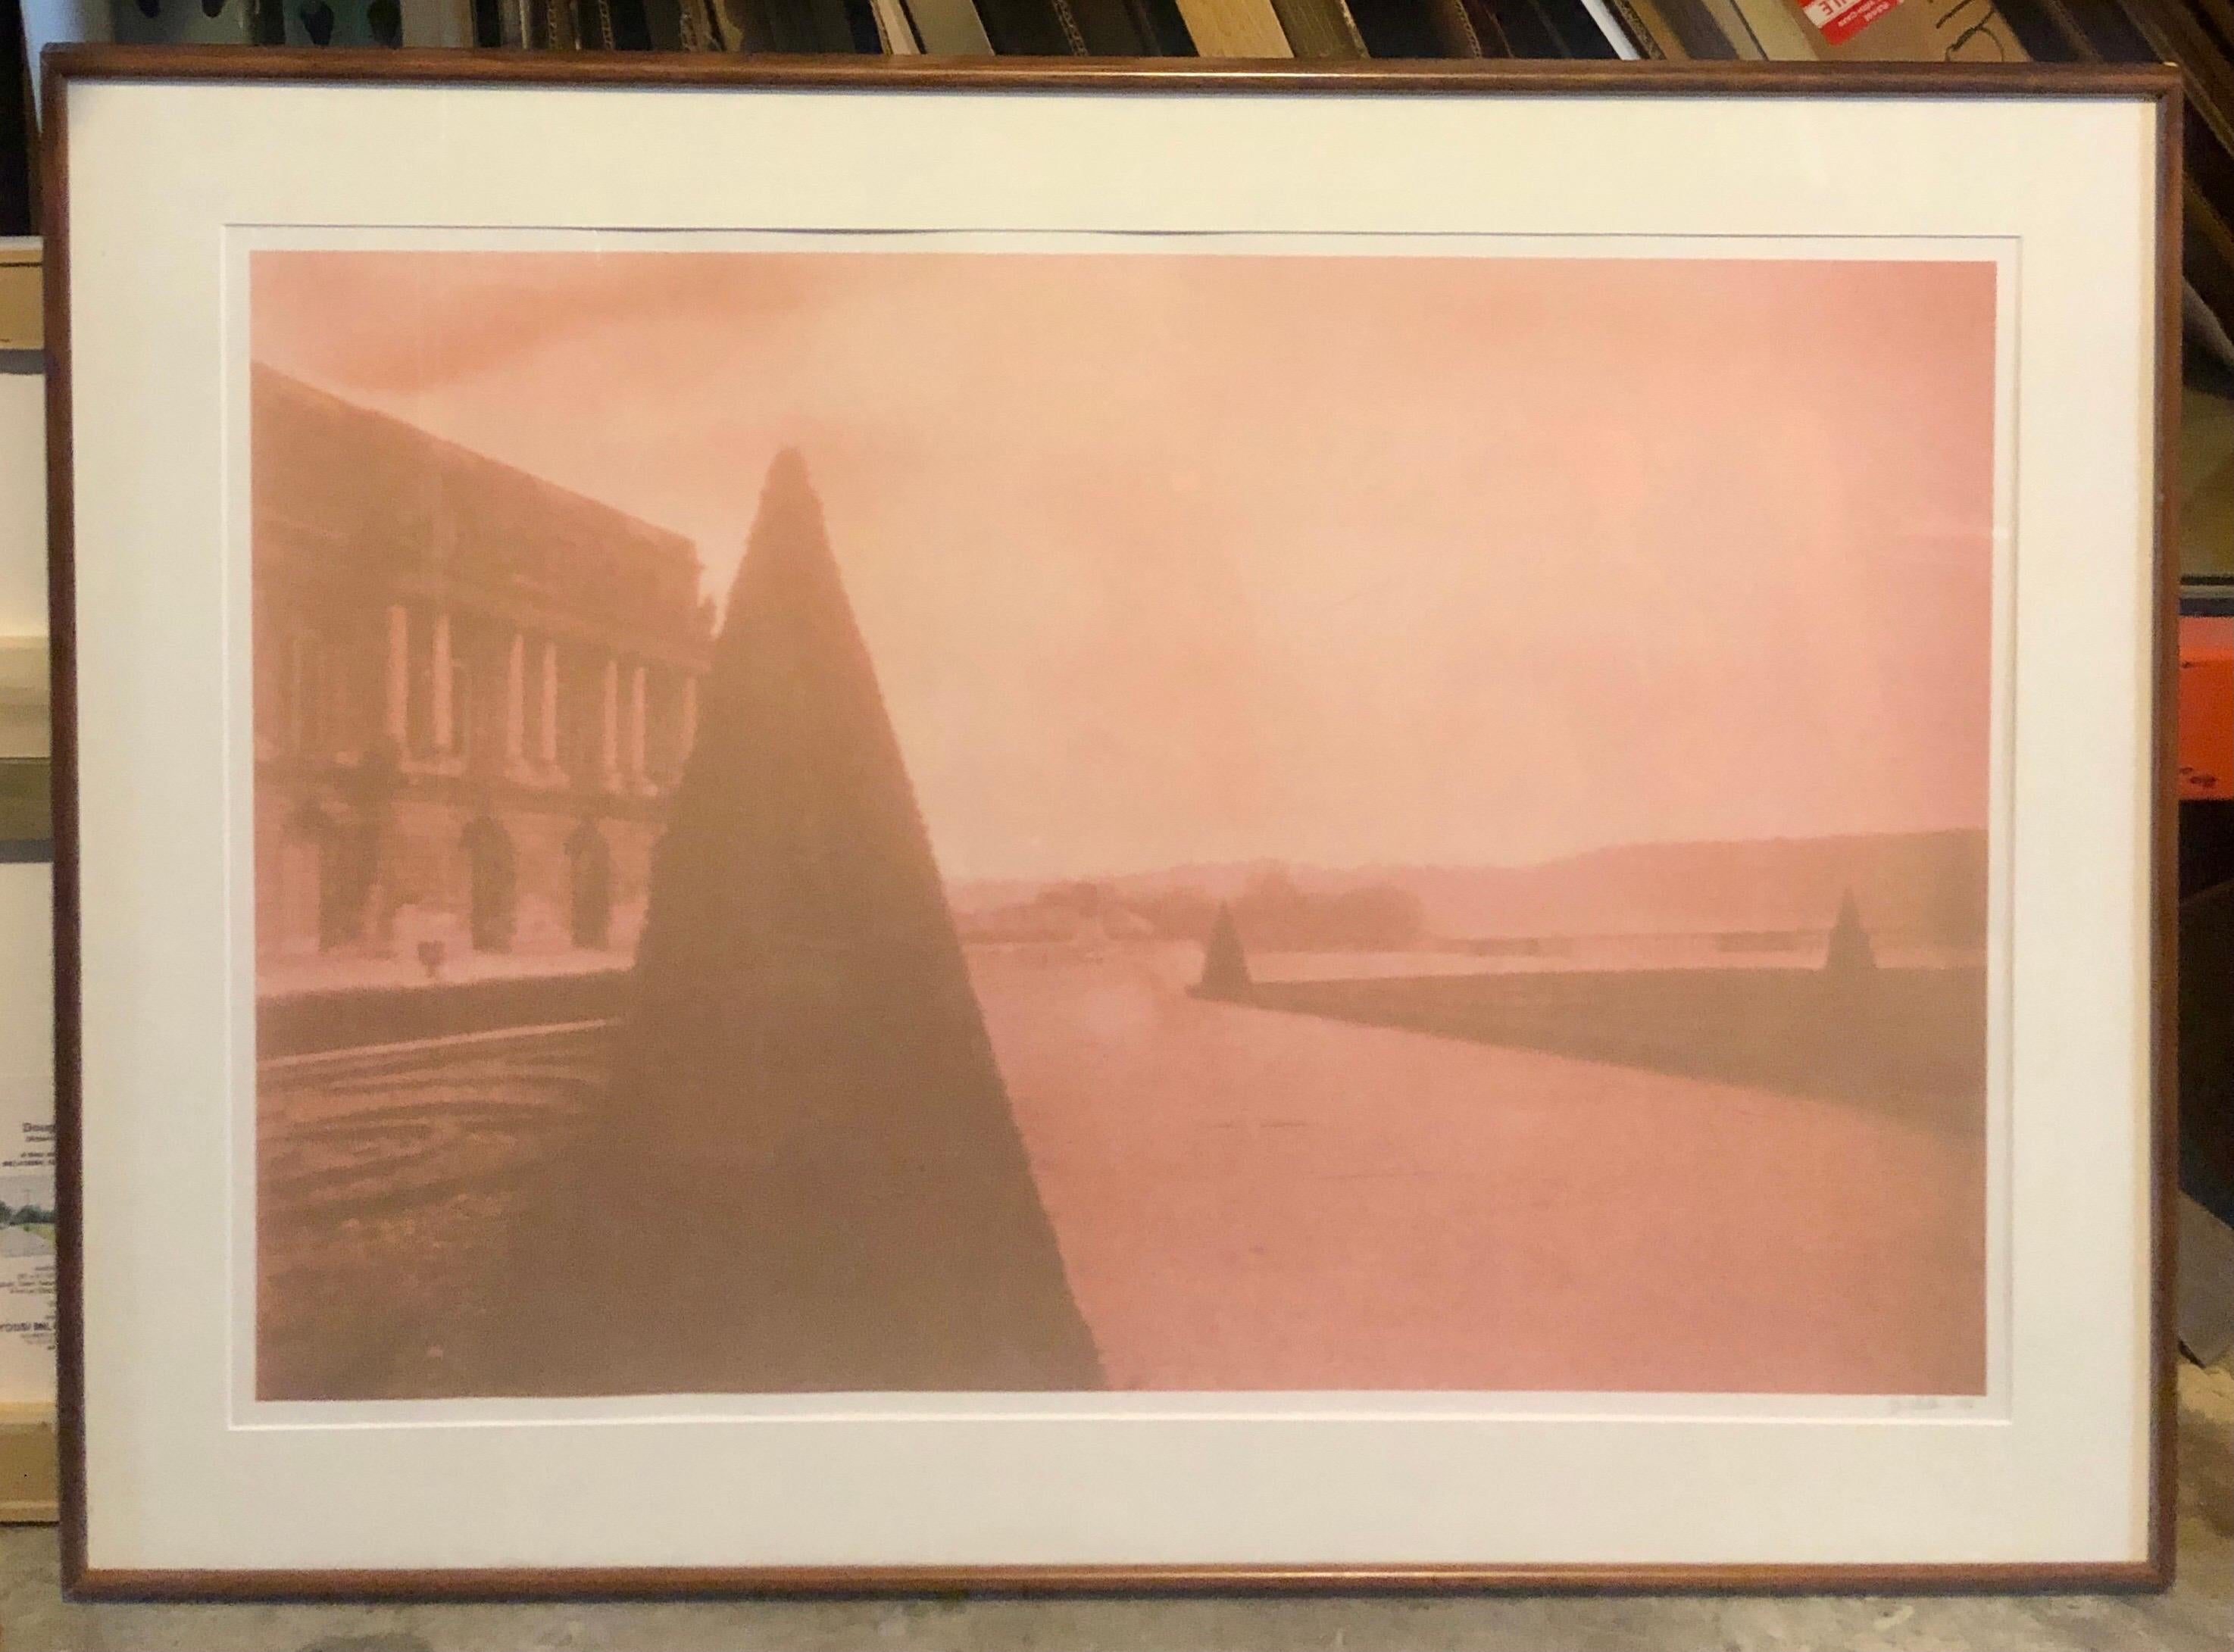 Large scale print, 24 X 36 inches. Framed to 29.5 X 41.5. This was described as Polaroid transfer print. It has the feel of a Frisson print. It is hand signed in pencil and dated. It is done in a sepia color tone. The color might have possibly